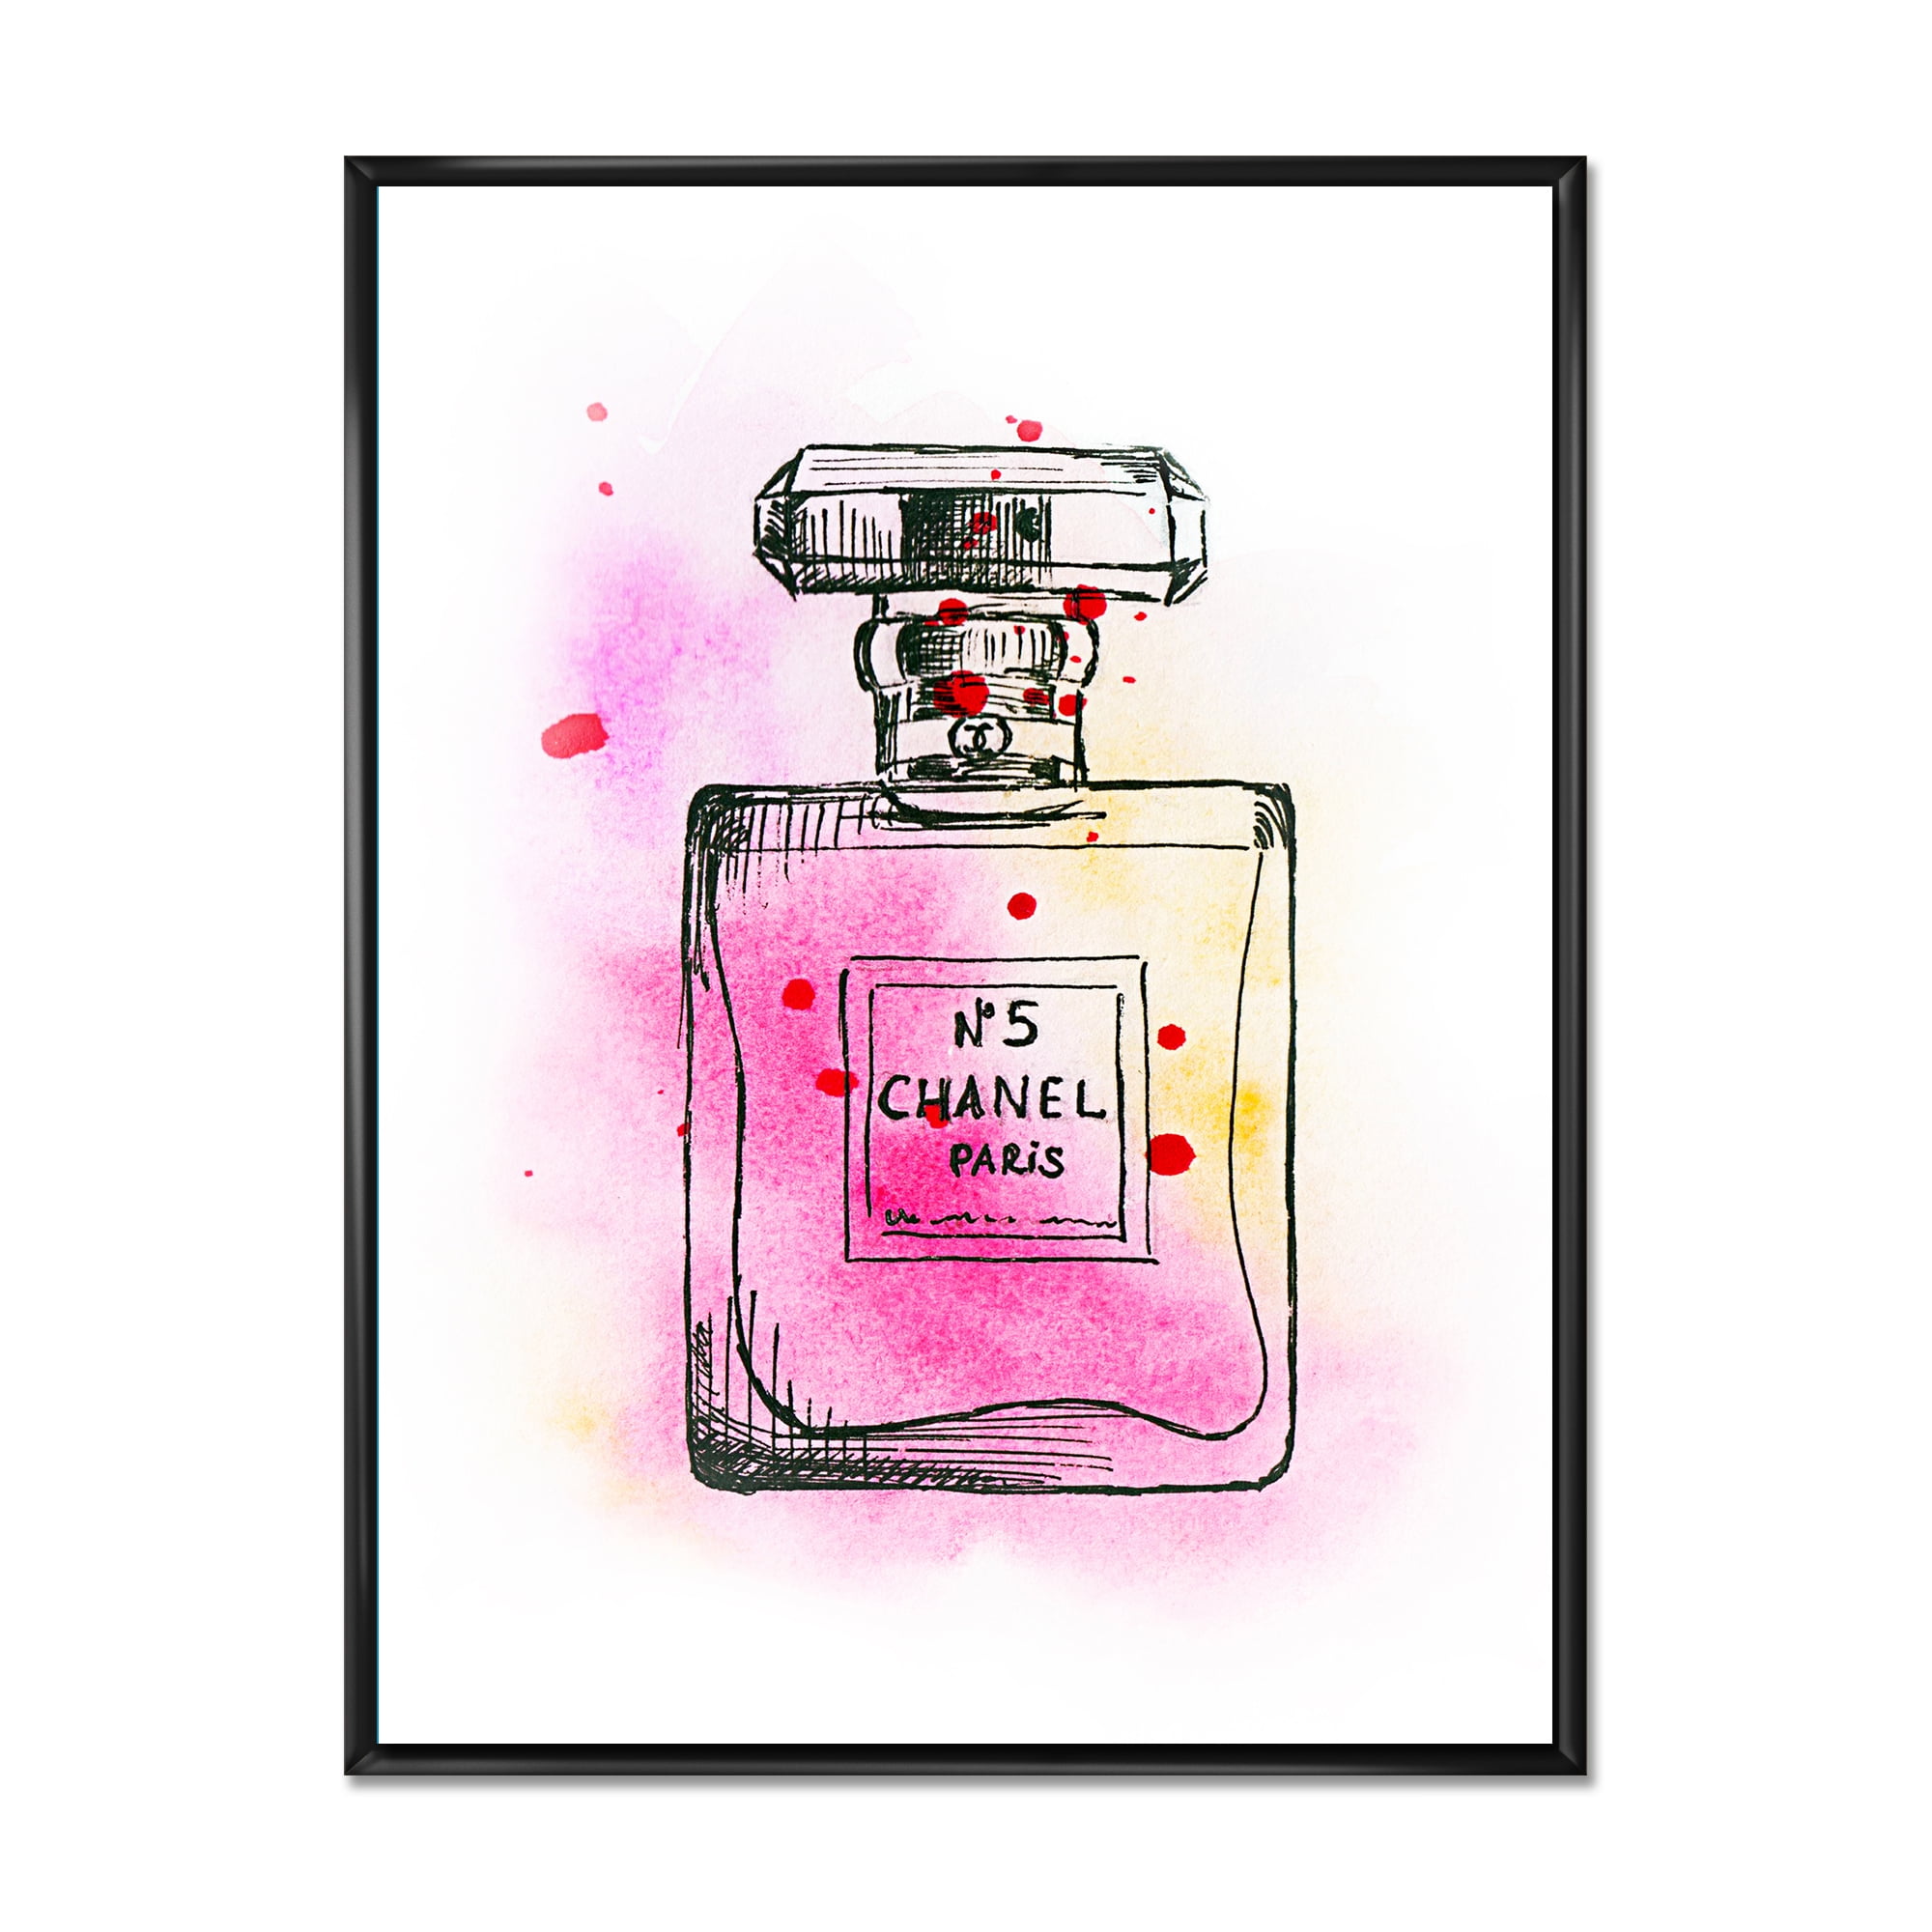 Perfume Chanel Five Pink Strokes 16 in x 32 in Framed Painting Canvas Print, by Designart - Walmart.com